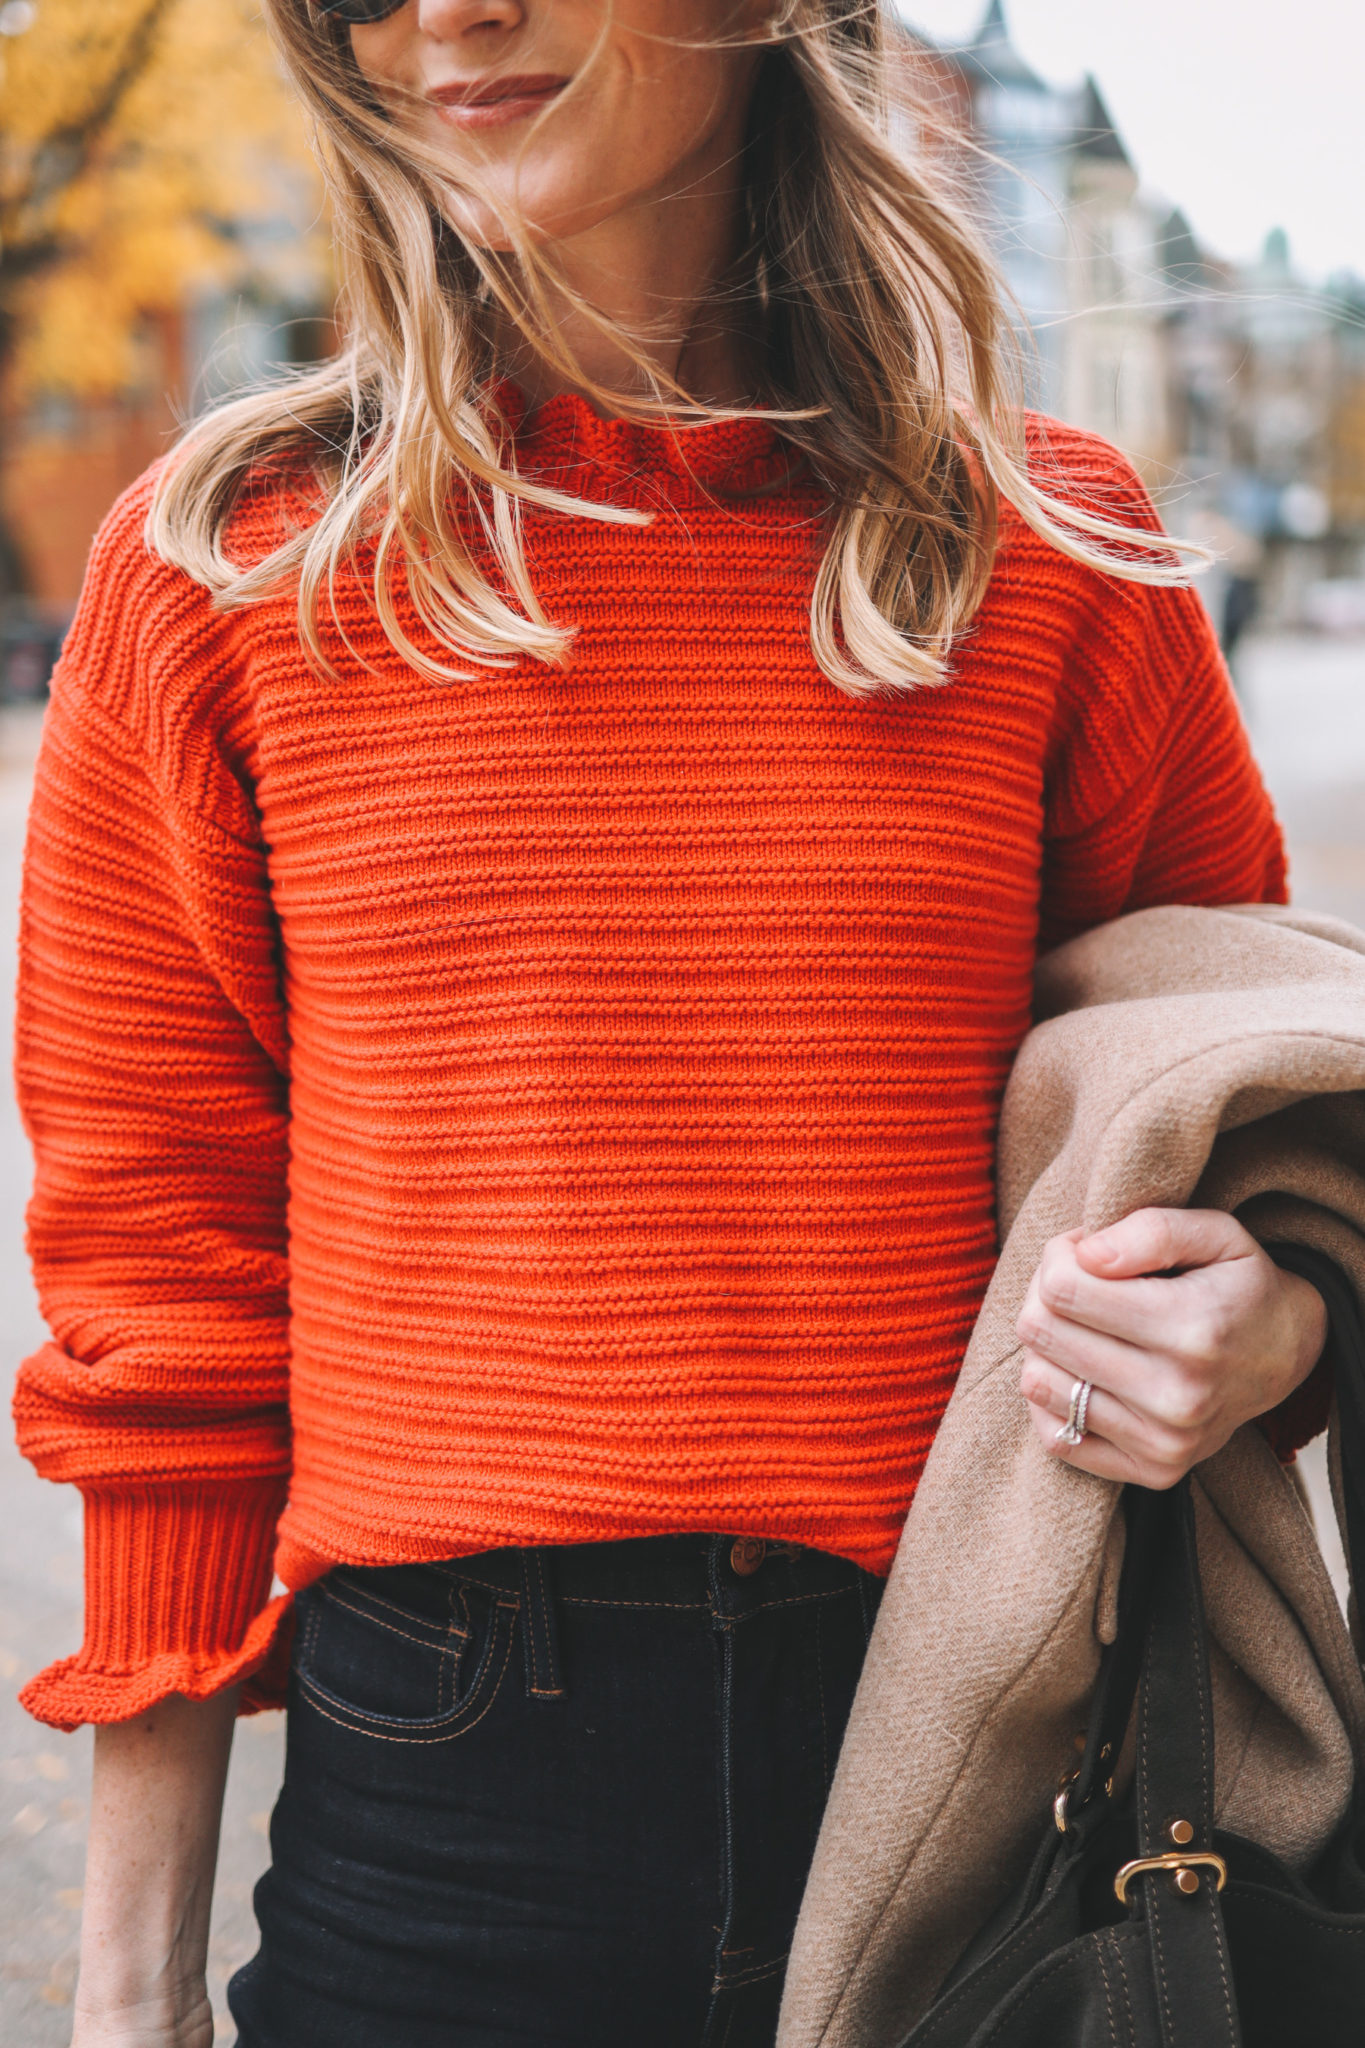 Ruffleneck Sweater - Kelly in the City | Lifestyle Blog